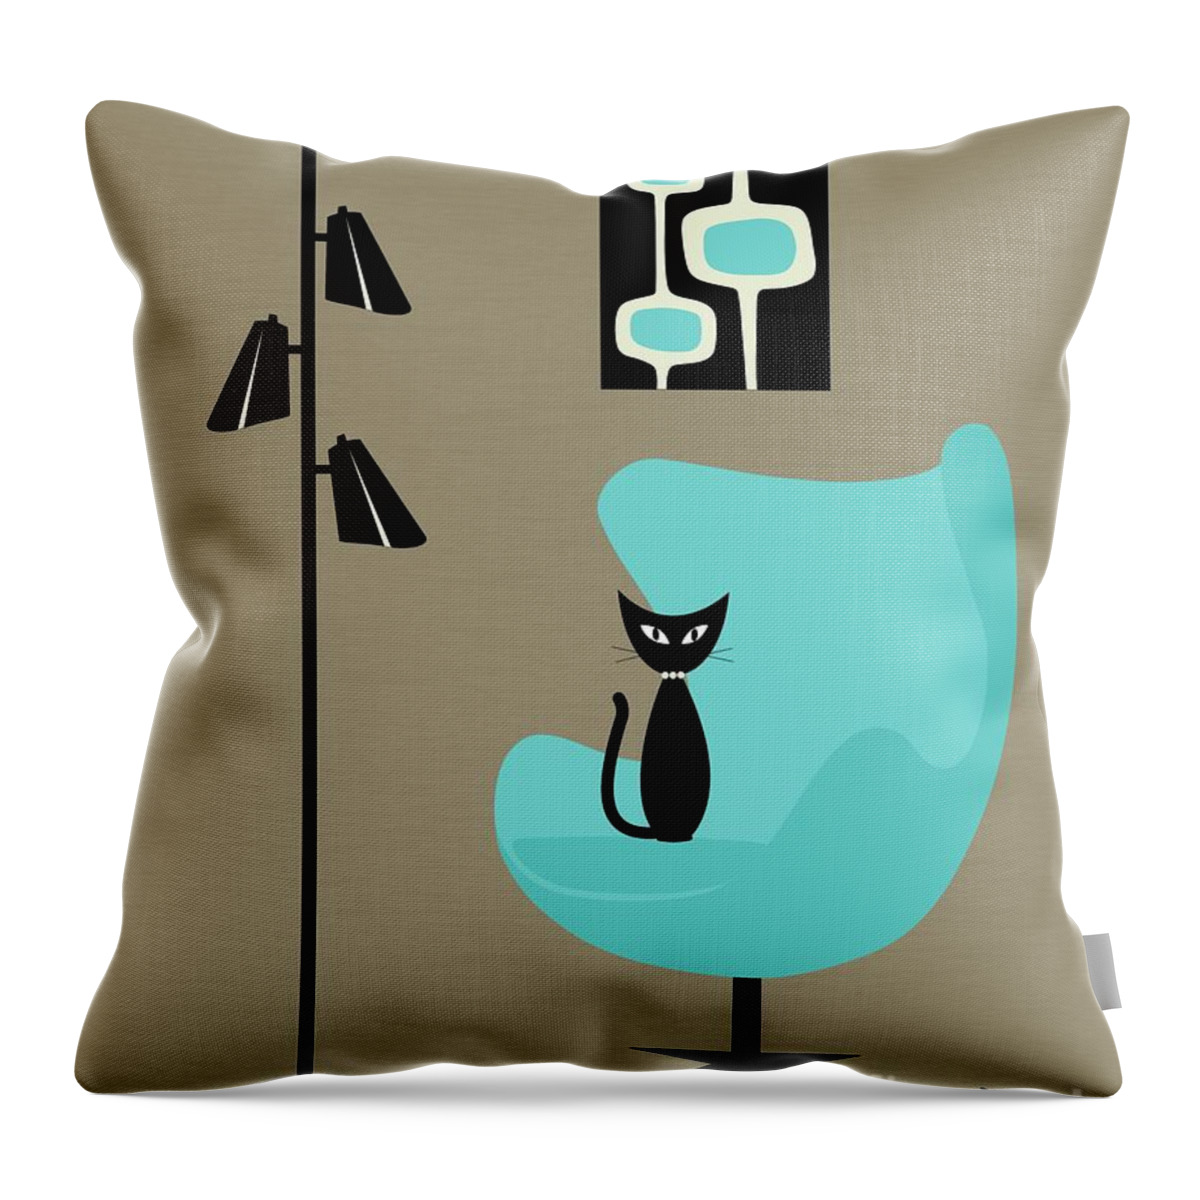  Throw Pillow featuring the digital art Mini Mod Pods in Turquoise by Donna Mibus